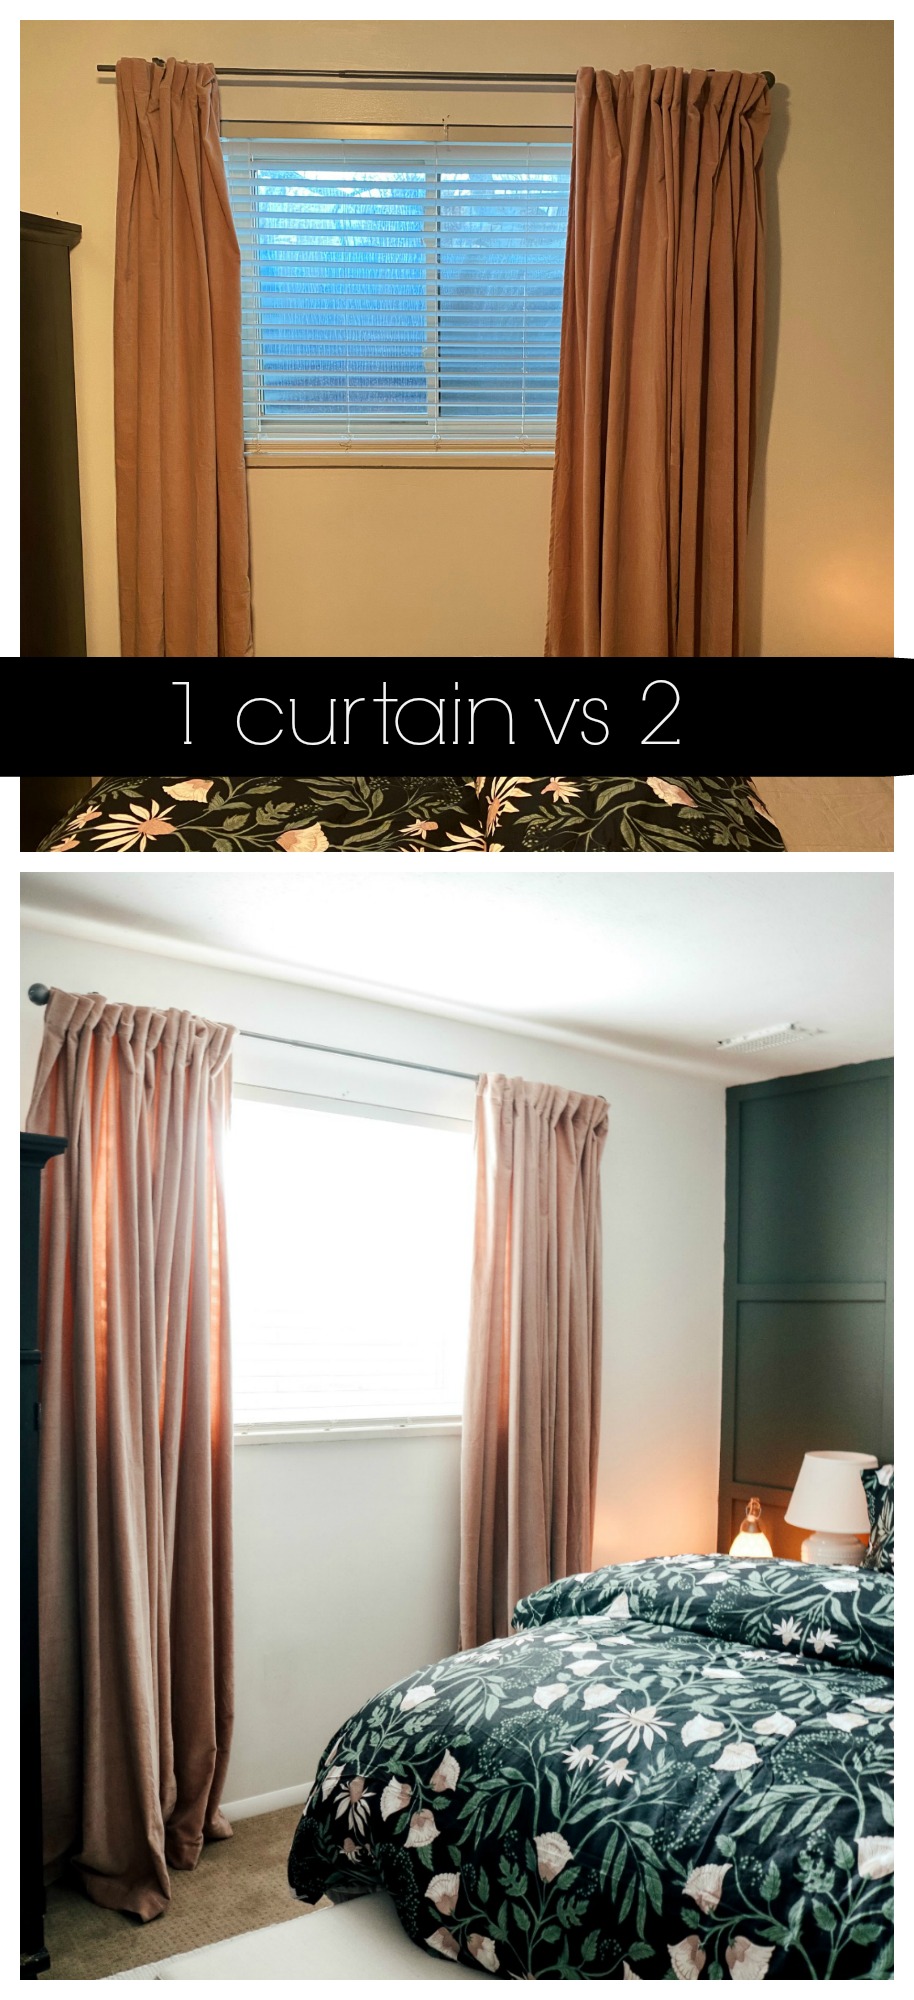 Guest Bedroom Makeover- Dark Board and Batten Square Wall